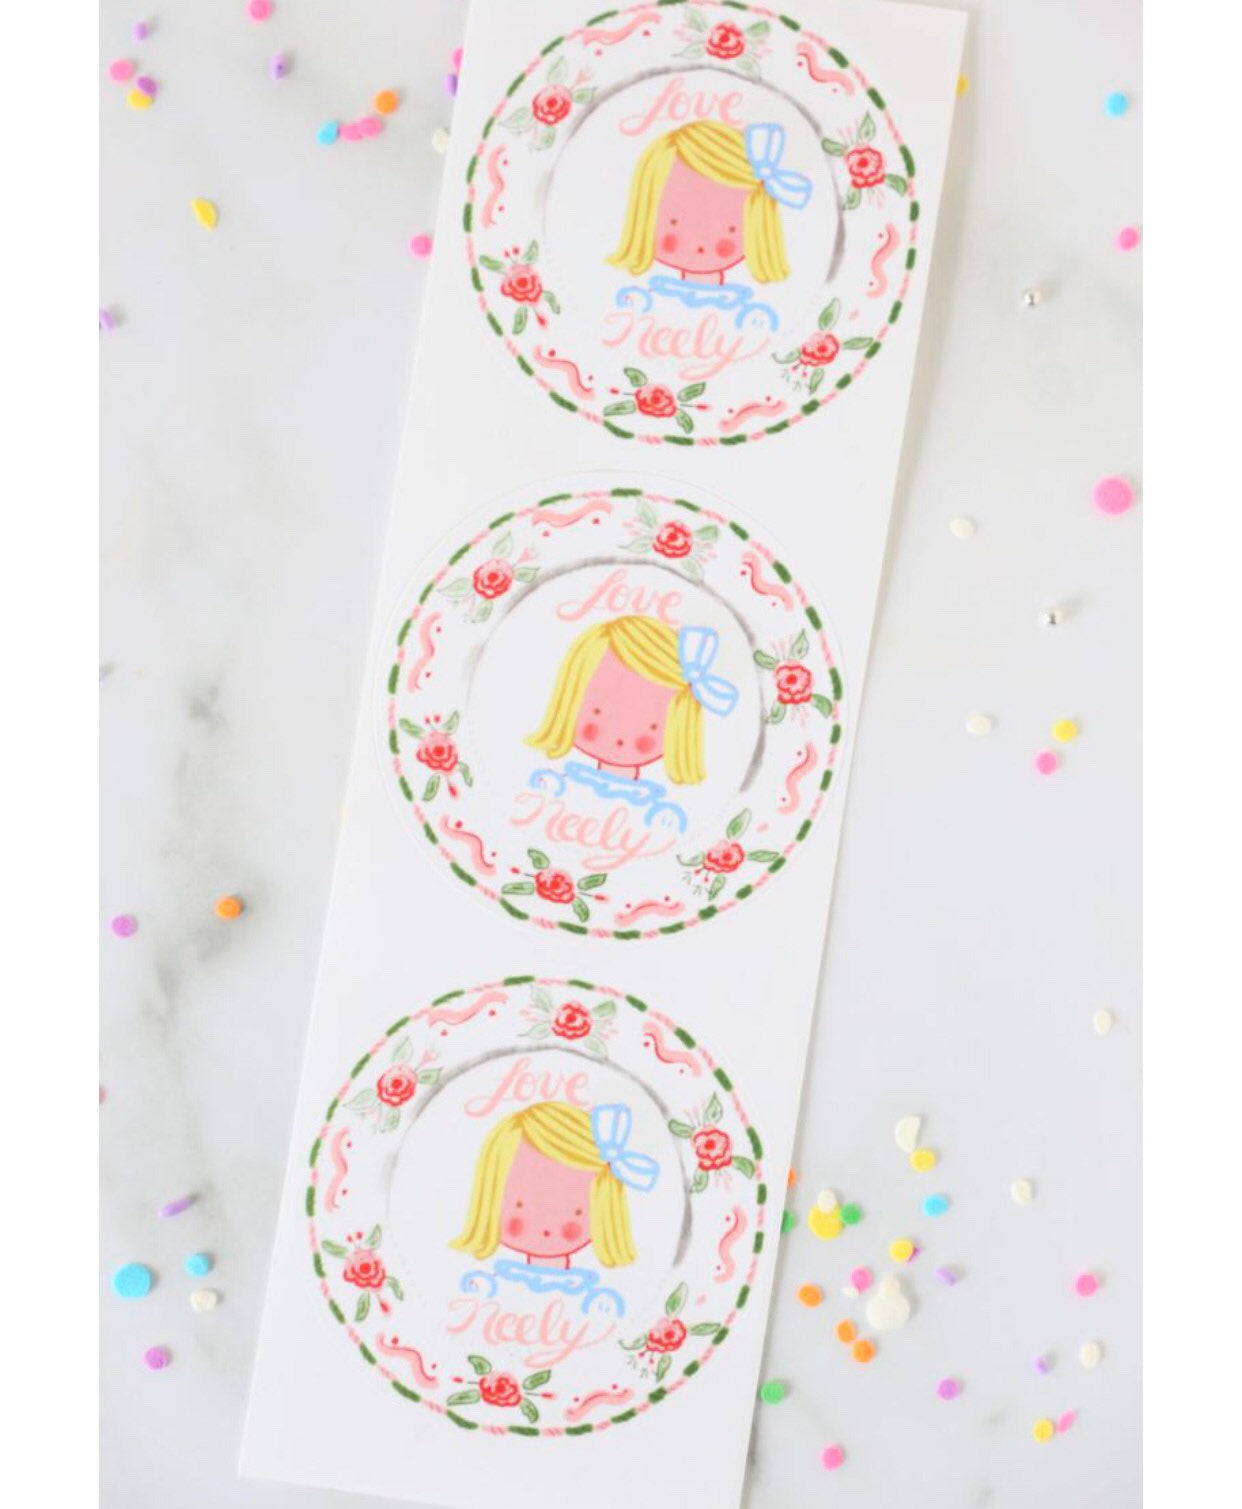 Custom Sticker Gift Tags - Girl with Heart and Bunny